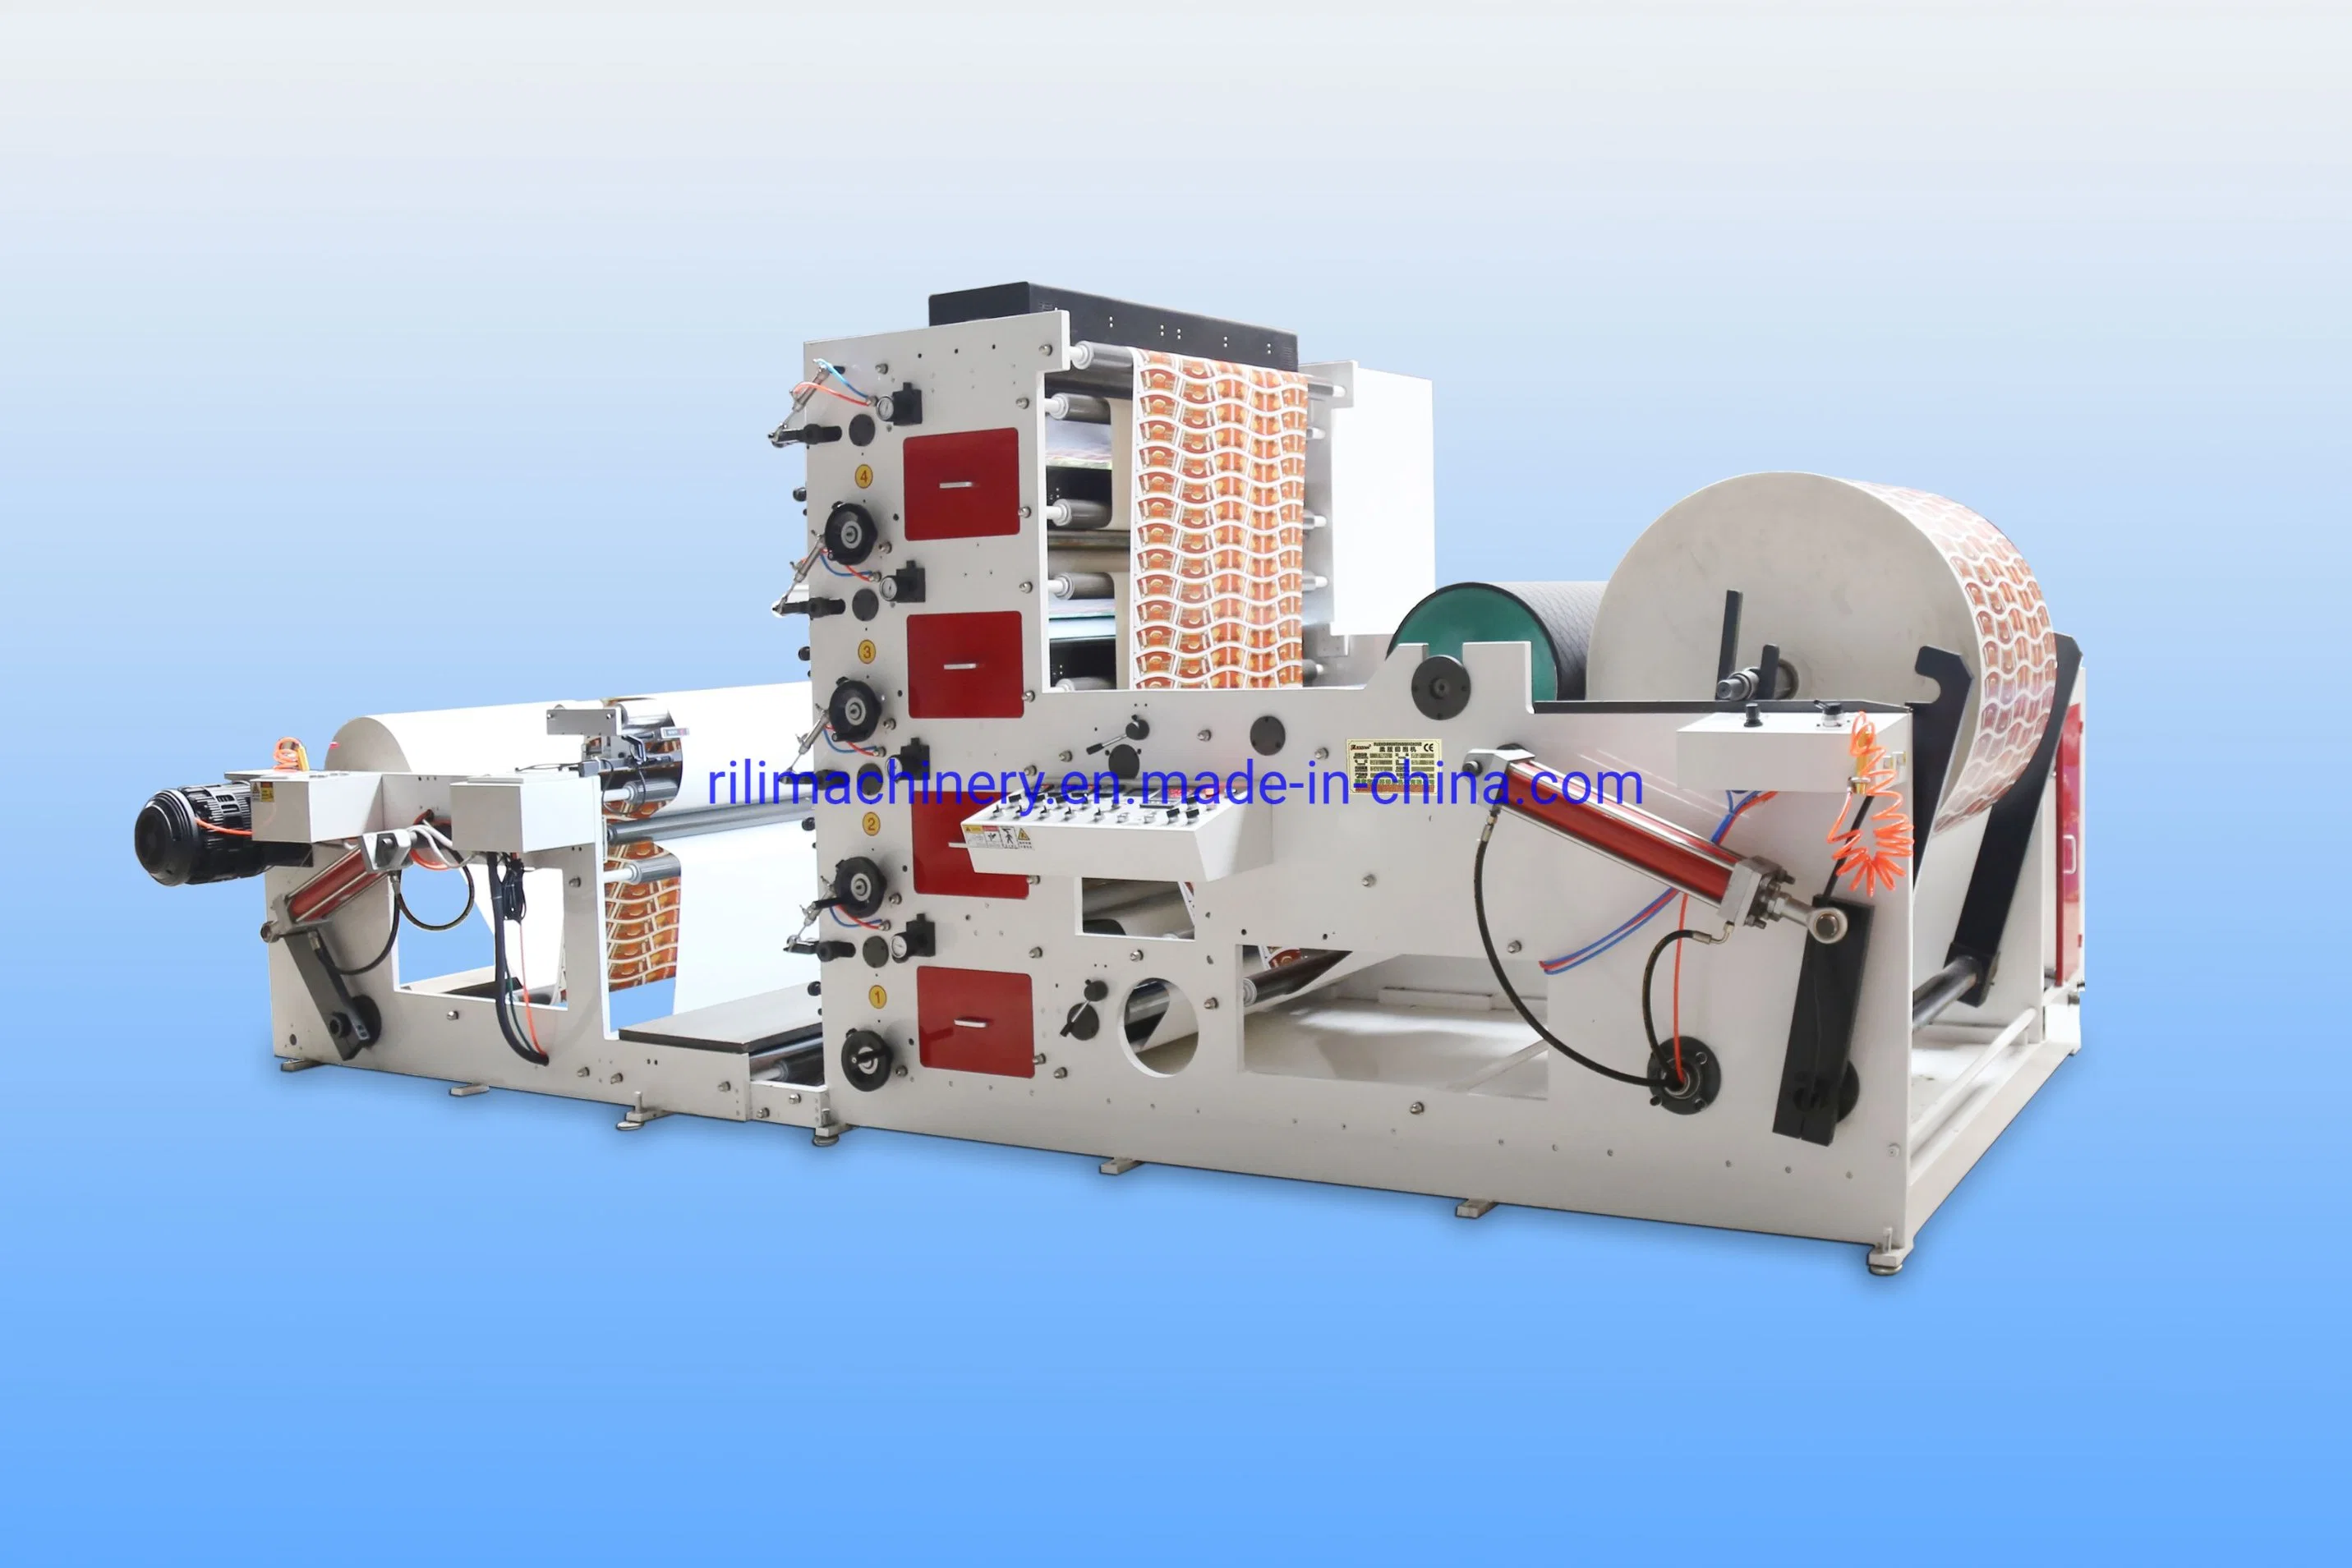 Manufacturer of Automatic Label Flexo Printing Machine with Lamination Station